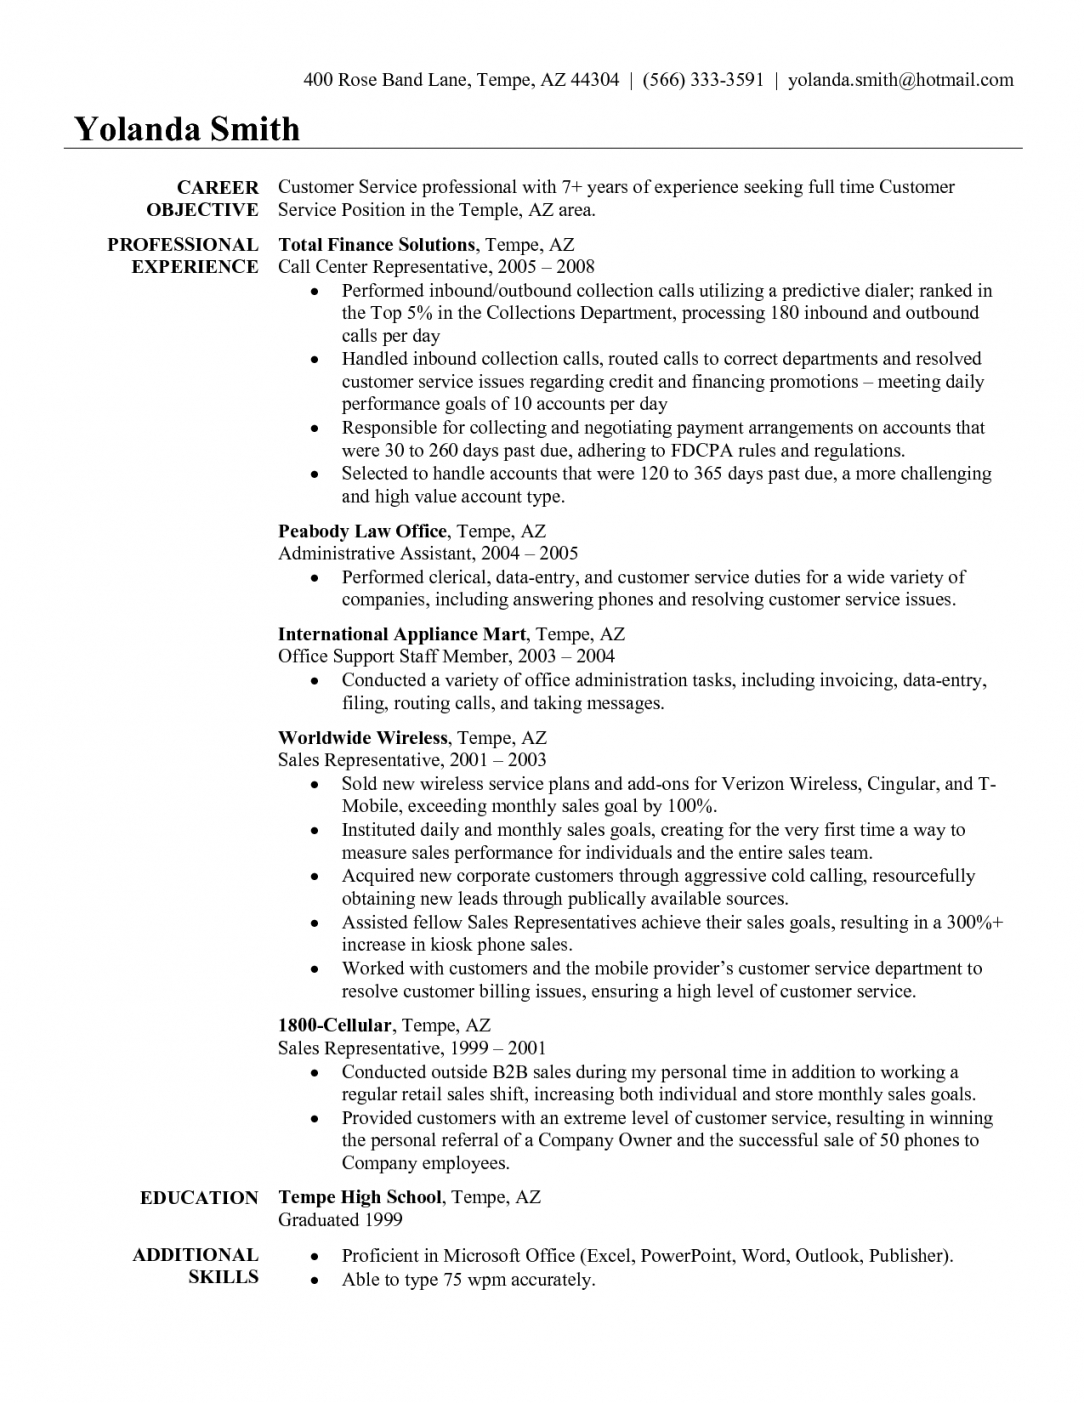 Customer Service Resume Objective Examples